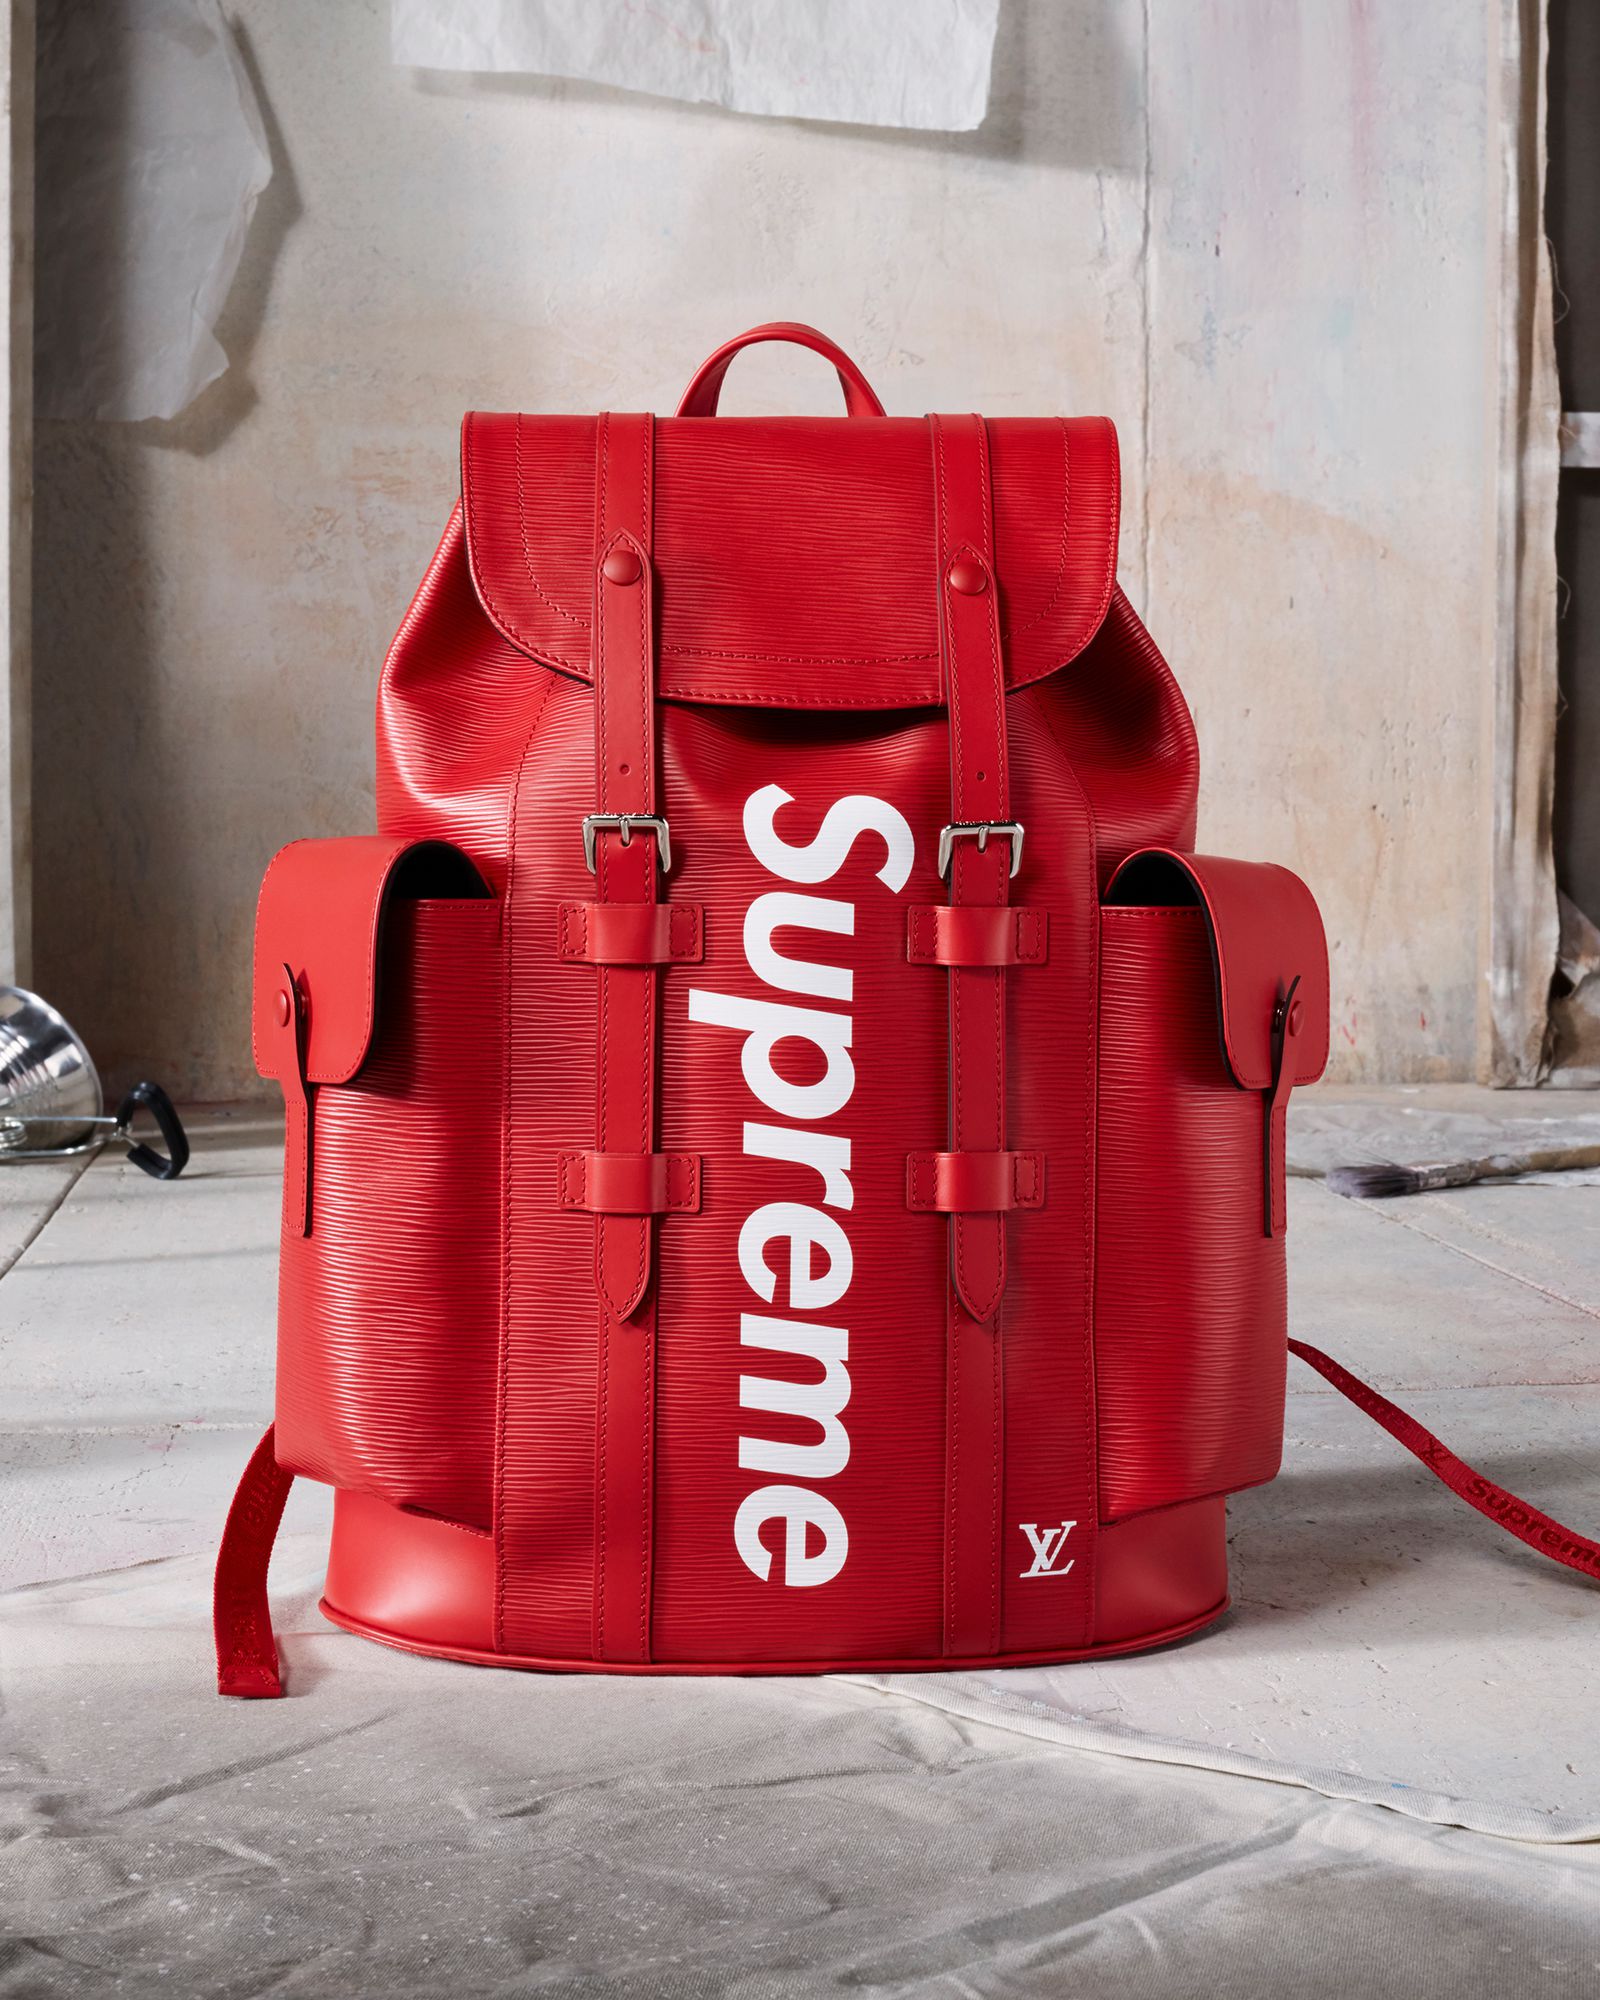 Replica-Louis-Vuitton-CHRISTOPHER-BACKPACK-SUPREME-Motivations-For-Luxury-Life